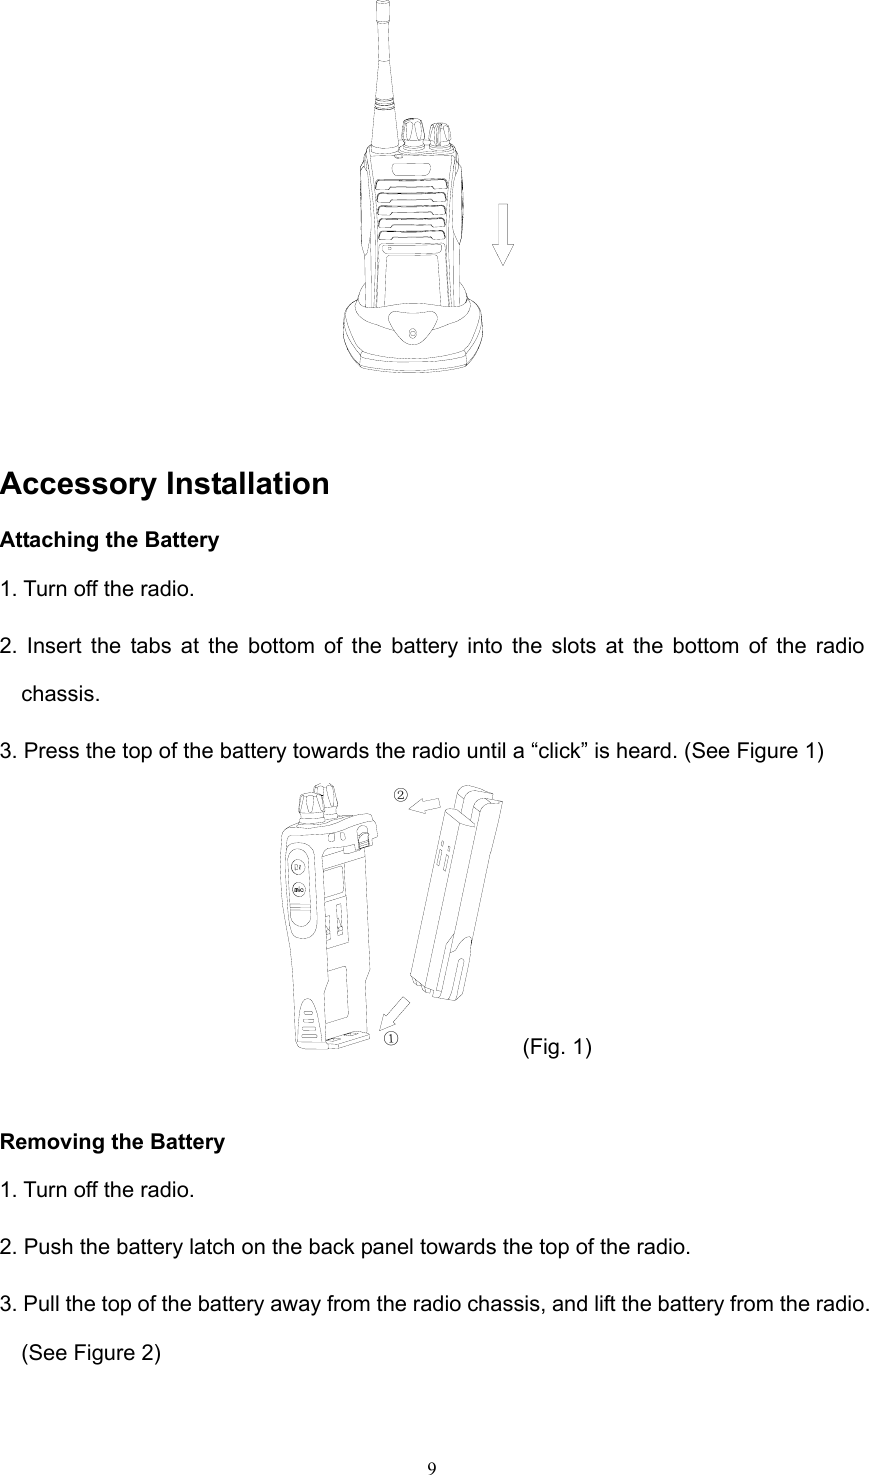  9  Accessory Installation Attaching the Battery 1. Turn off the radio. 2. Insert the tabs at the bottom of the battery into the slots at the bottom of the radio chassis. 3. Press the top of the battery towards the radio until a “click” is heard. (See Figure 1) ①② (Fig. 1)  Removing the Battery 1. Turn off the radio. 2. Push the battery latch on the back panel towards the top of the radio. 3. Pull the top of the battery away from the radio chassis, and lift the battery from the radio. (See Figure 2) 